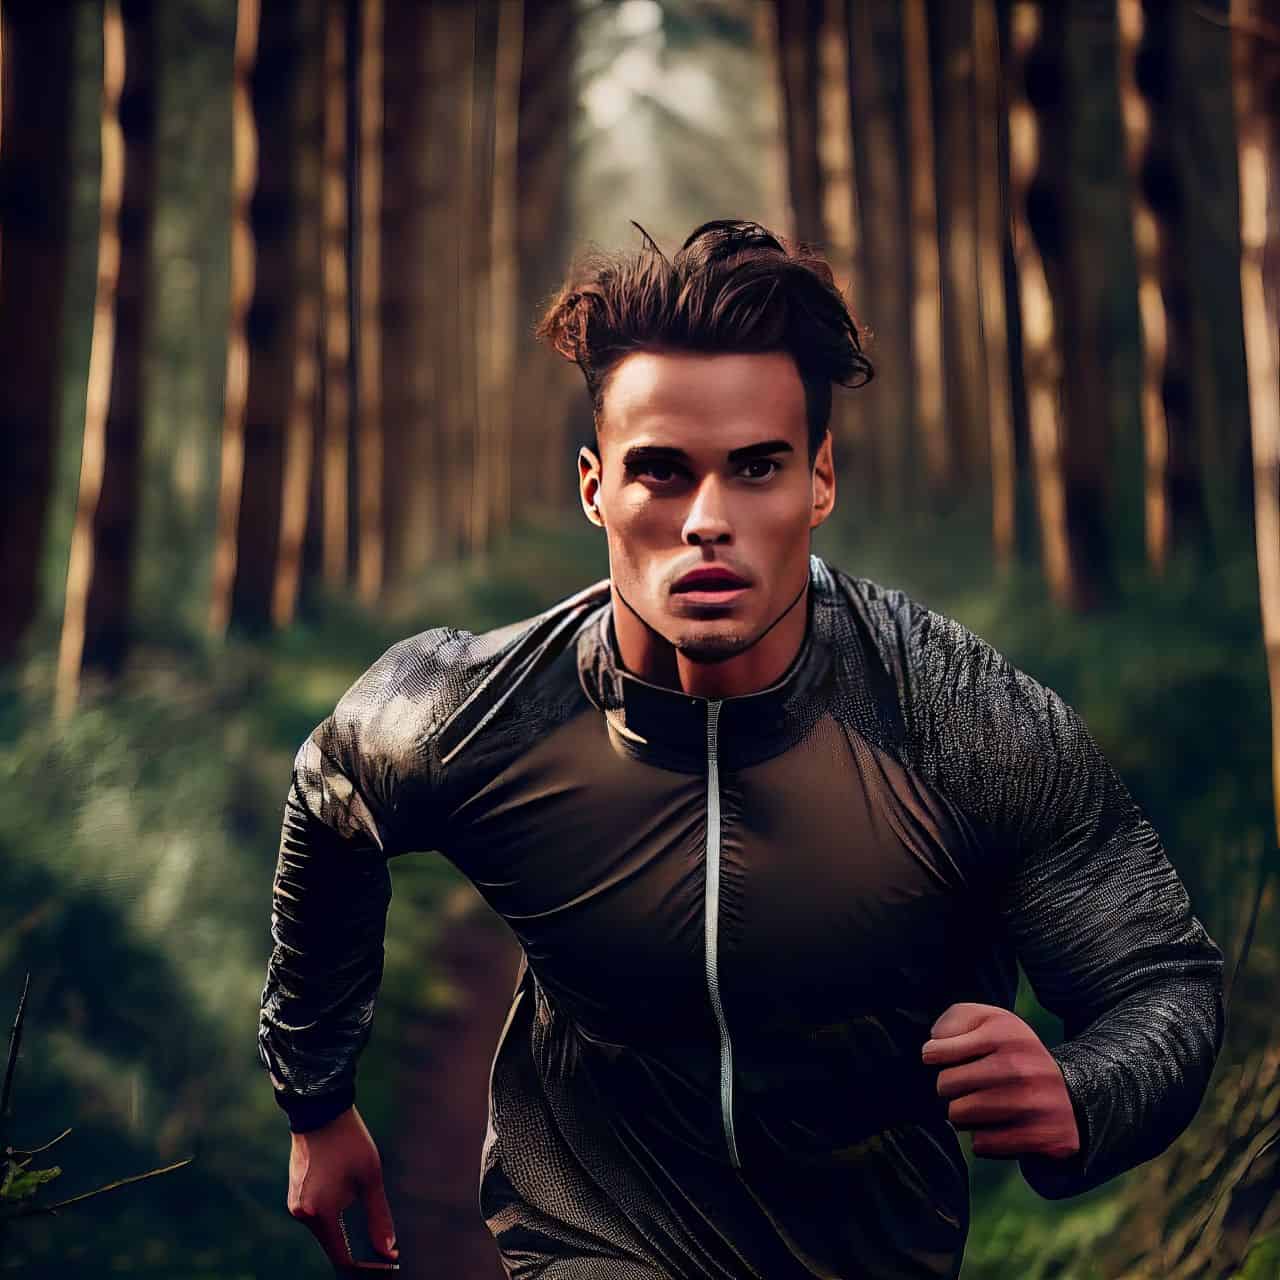 man jogging in the forest